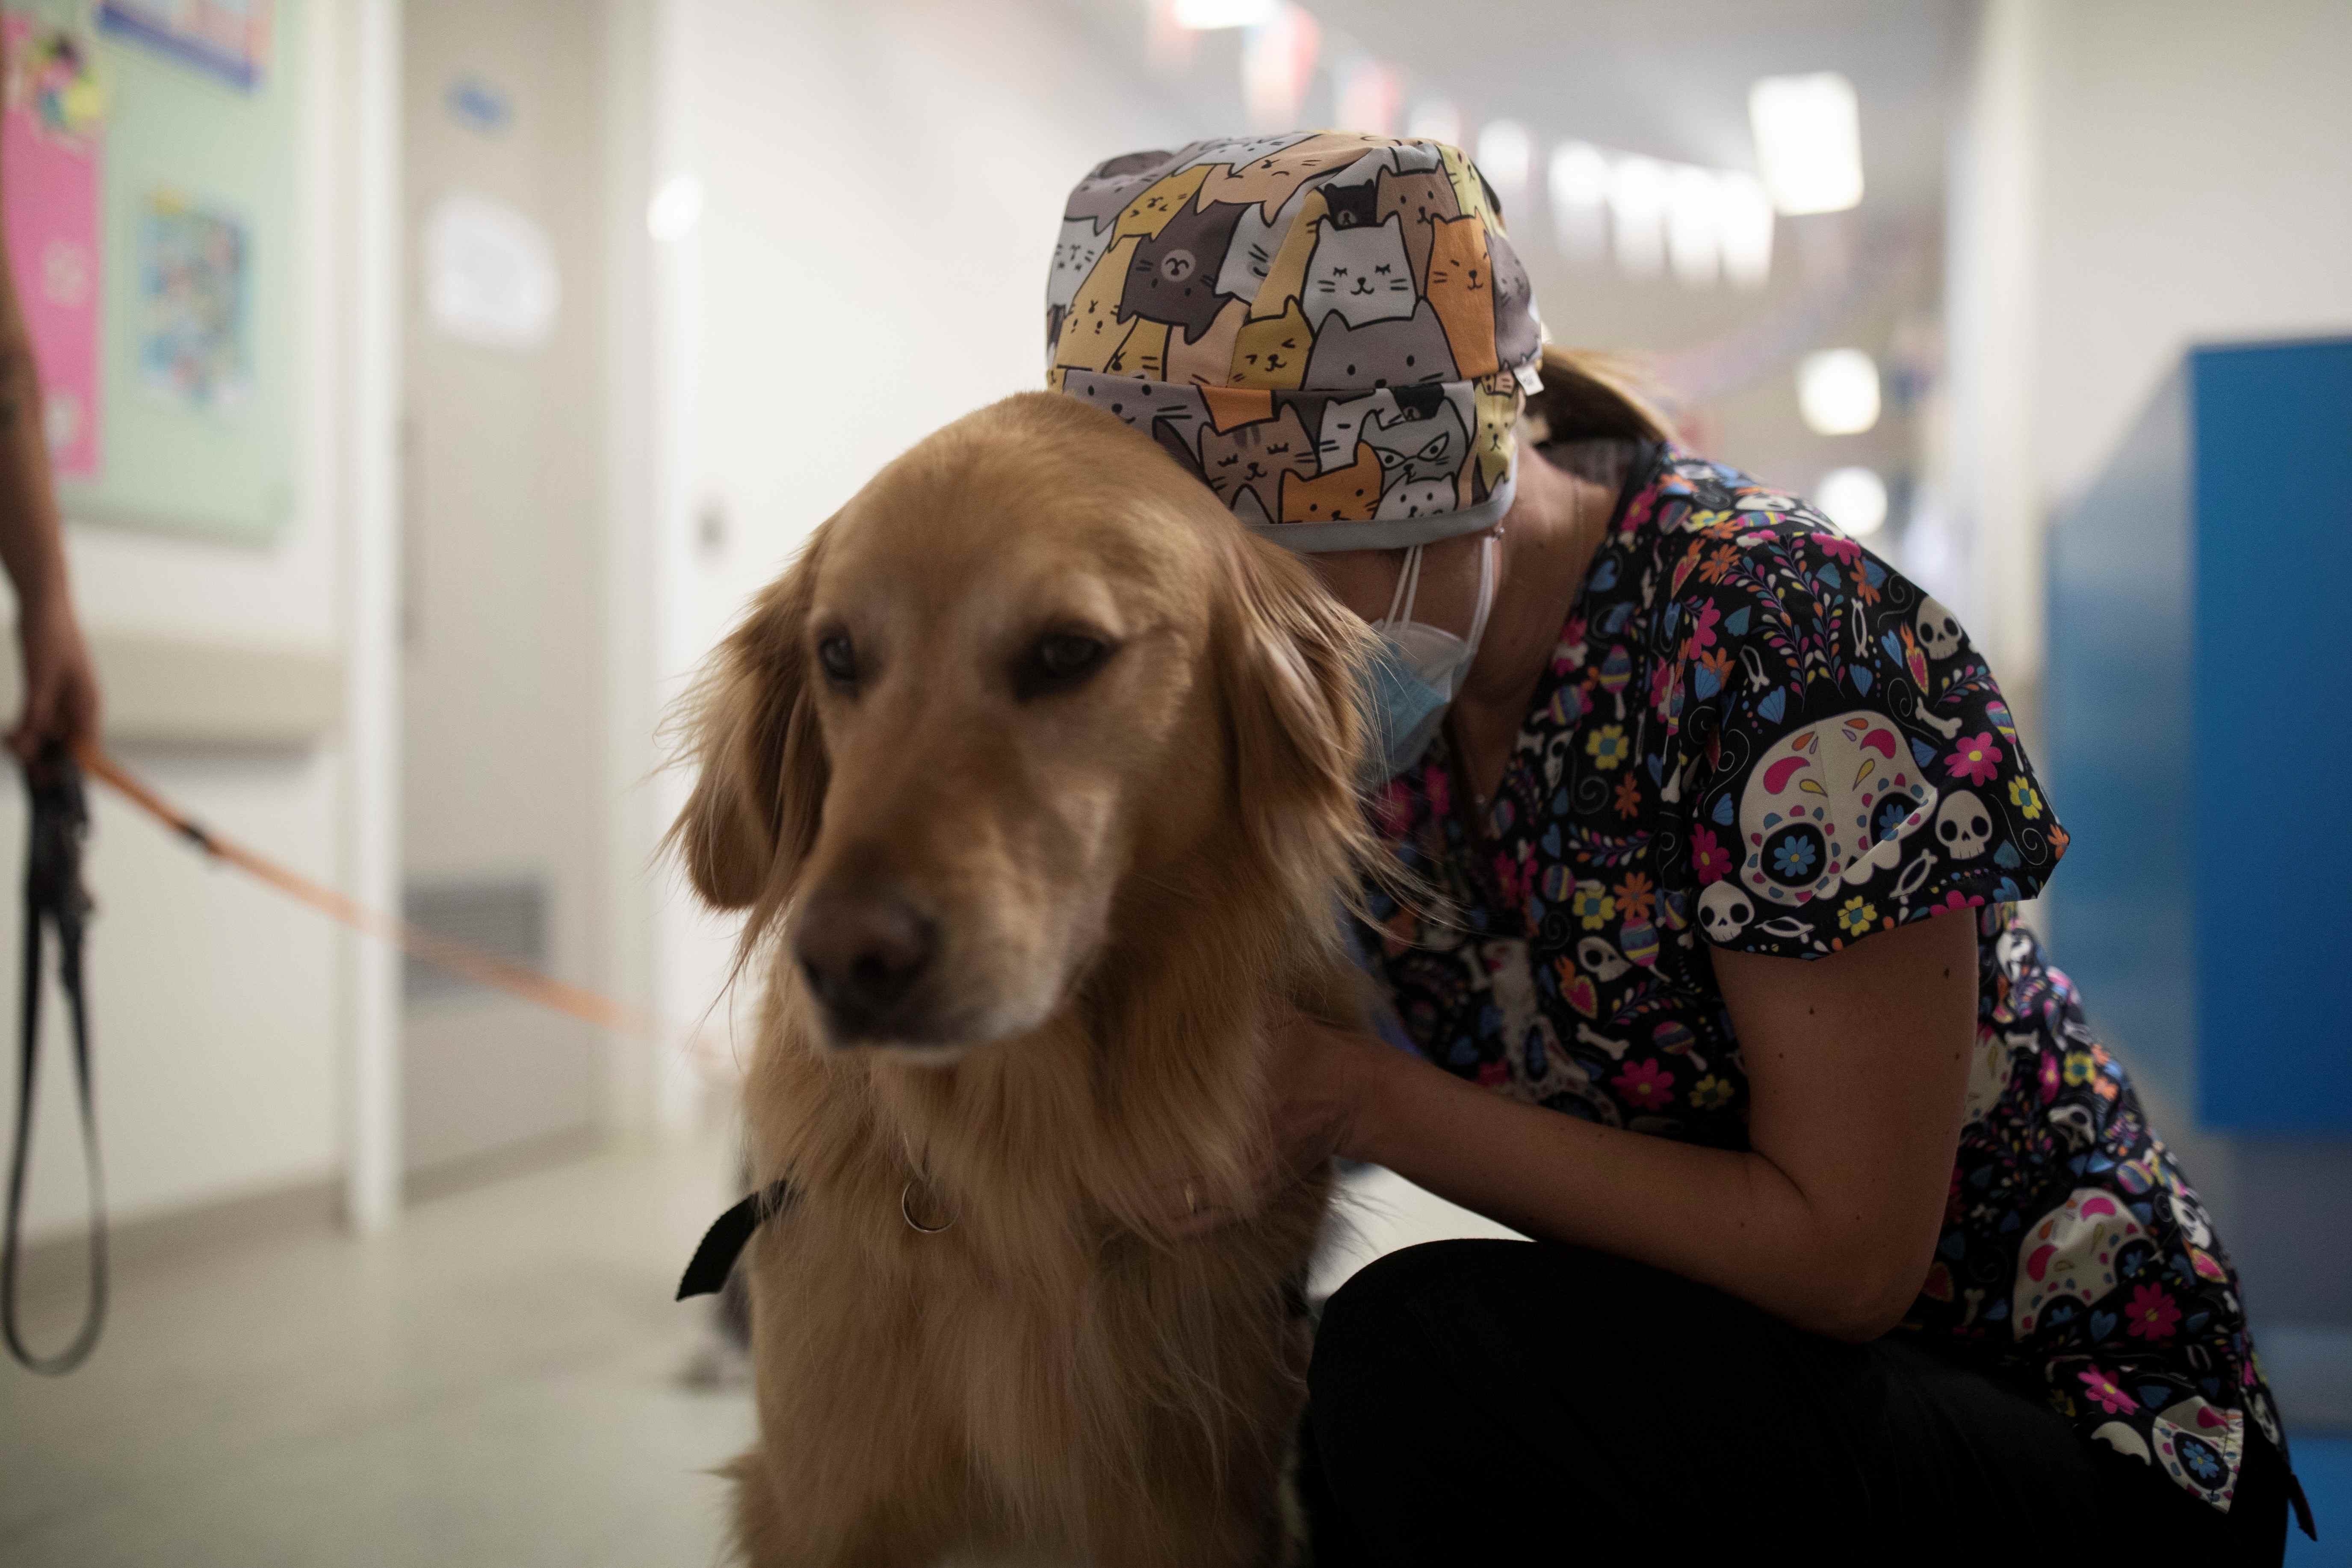 Chile ‘therapy’ dogs offer tummy rubs to soothe patients, medics